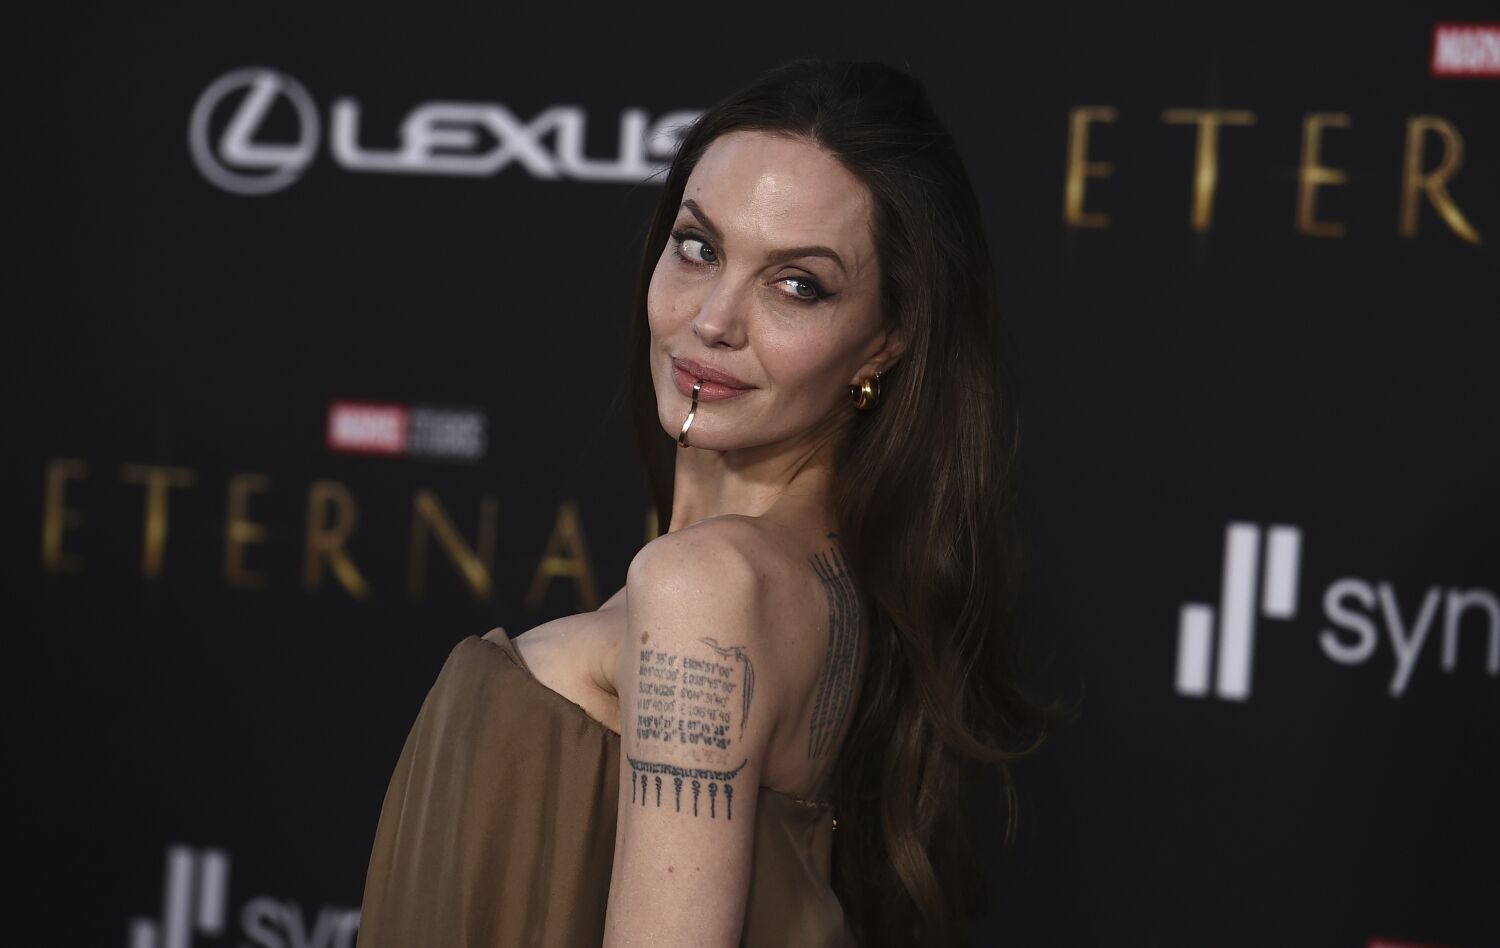 Angelina Jolie stepped down from her U.N. role but has more humanitarian work in mind